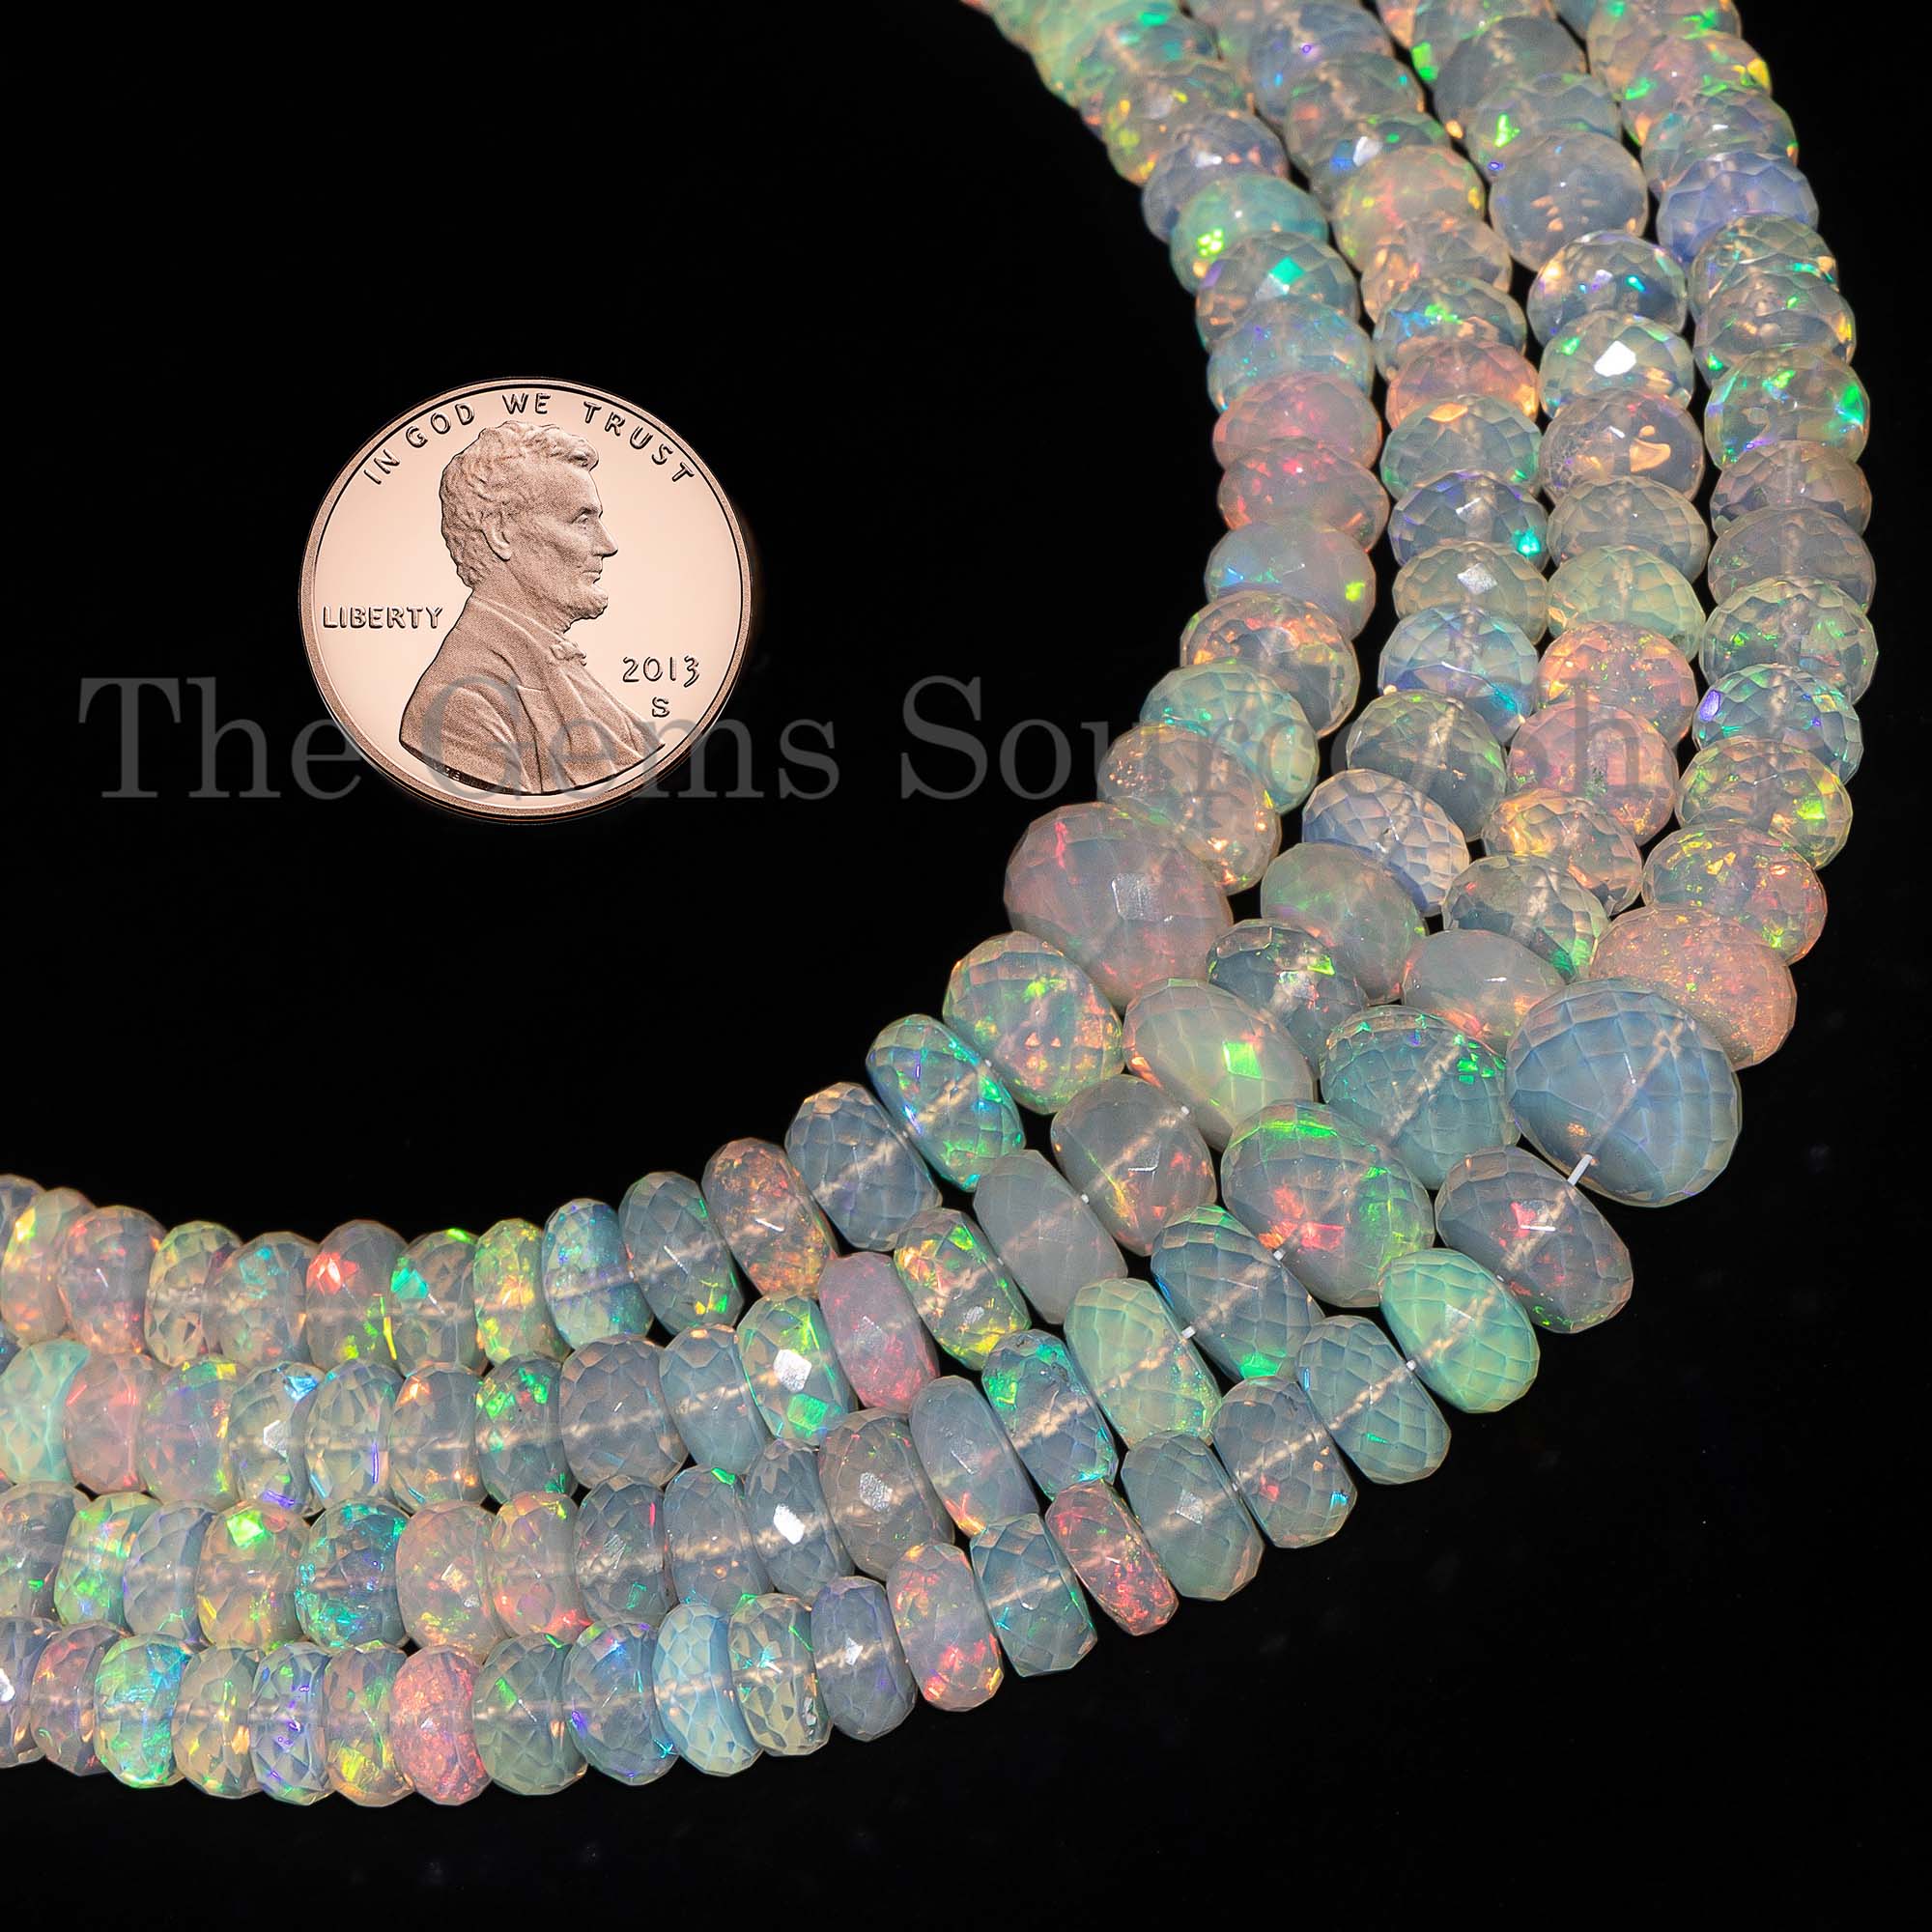 5-8mm Top Quality Ethiopian Opal Beads, Natural Opal Faceted Beads, Fire Opal Rondelle Beads, Opal Gemstone Beads, Big Size Opal Beads